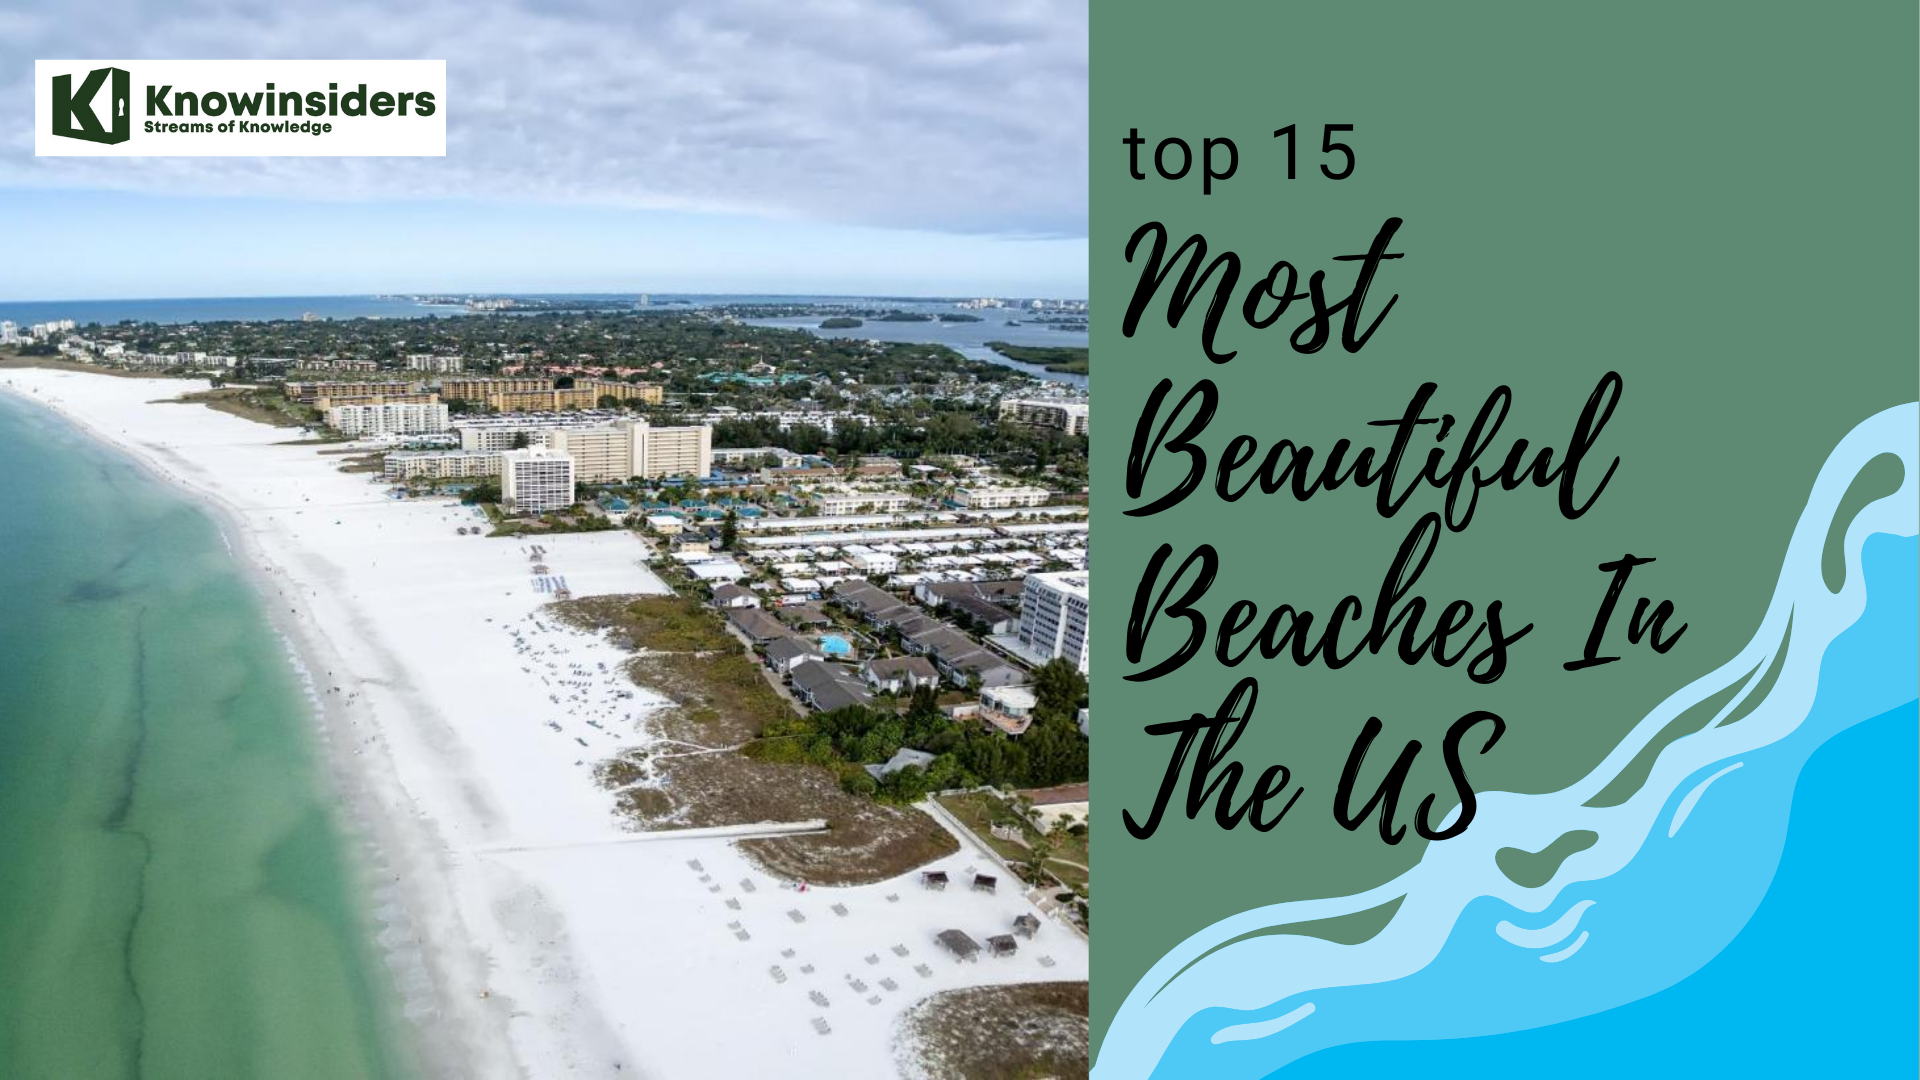 Top 15 Most Beautiful Beaches in the US